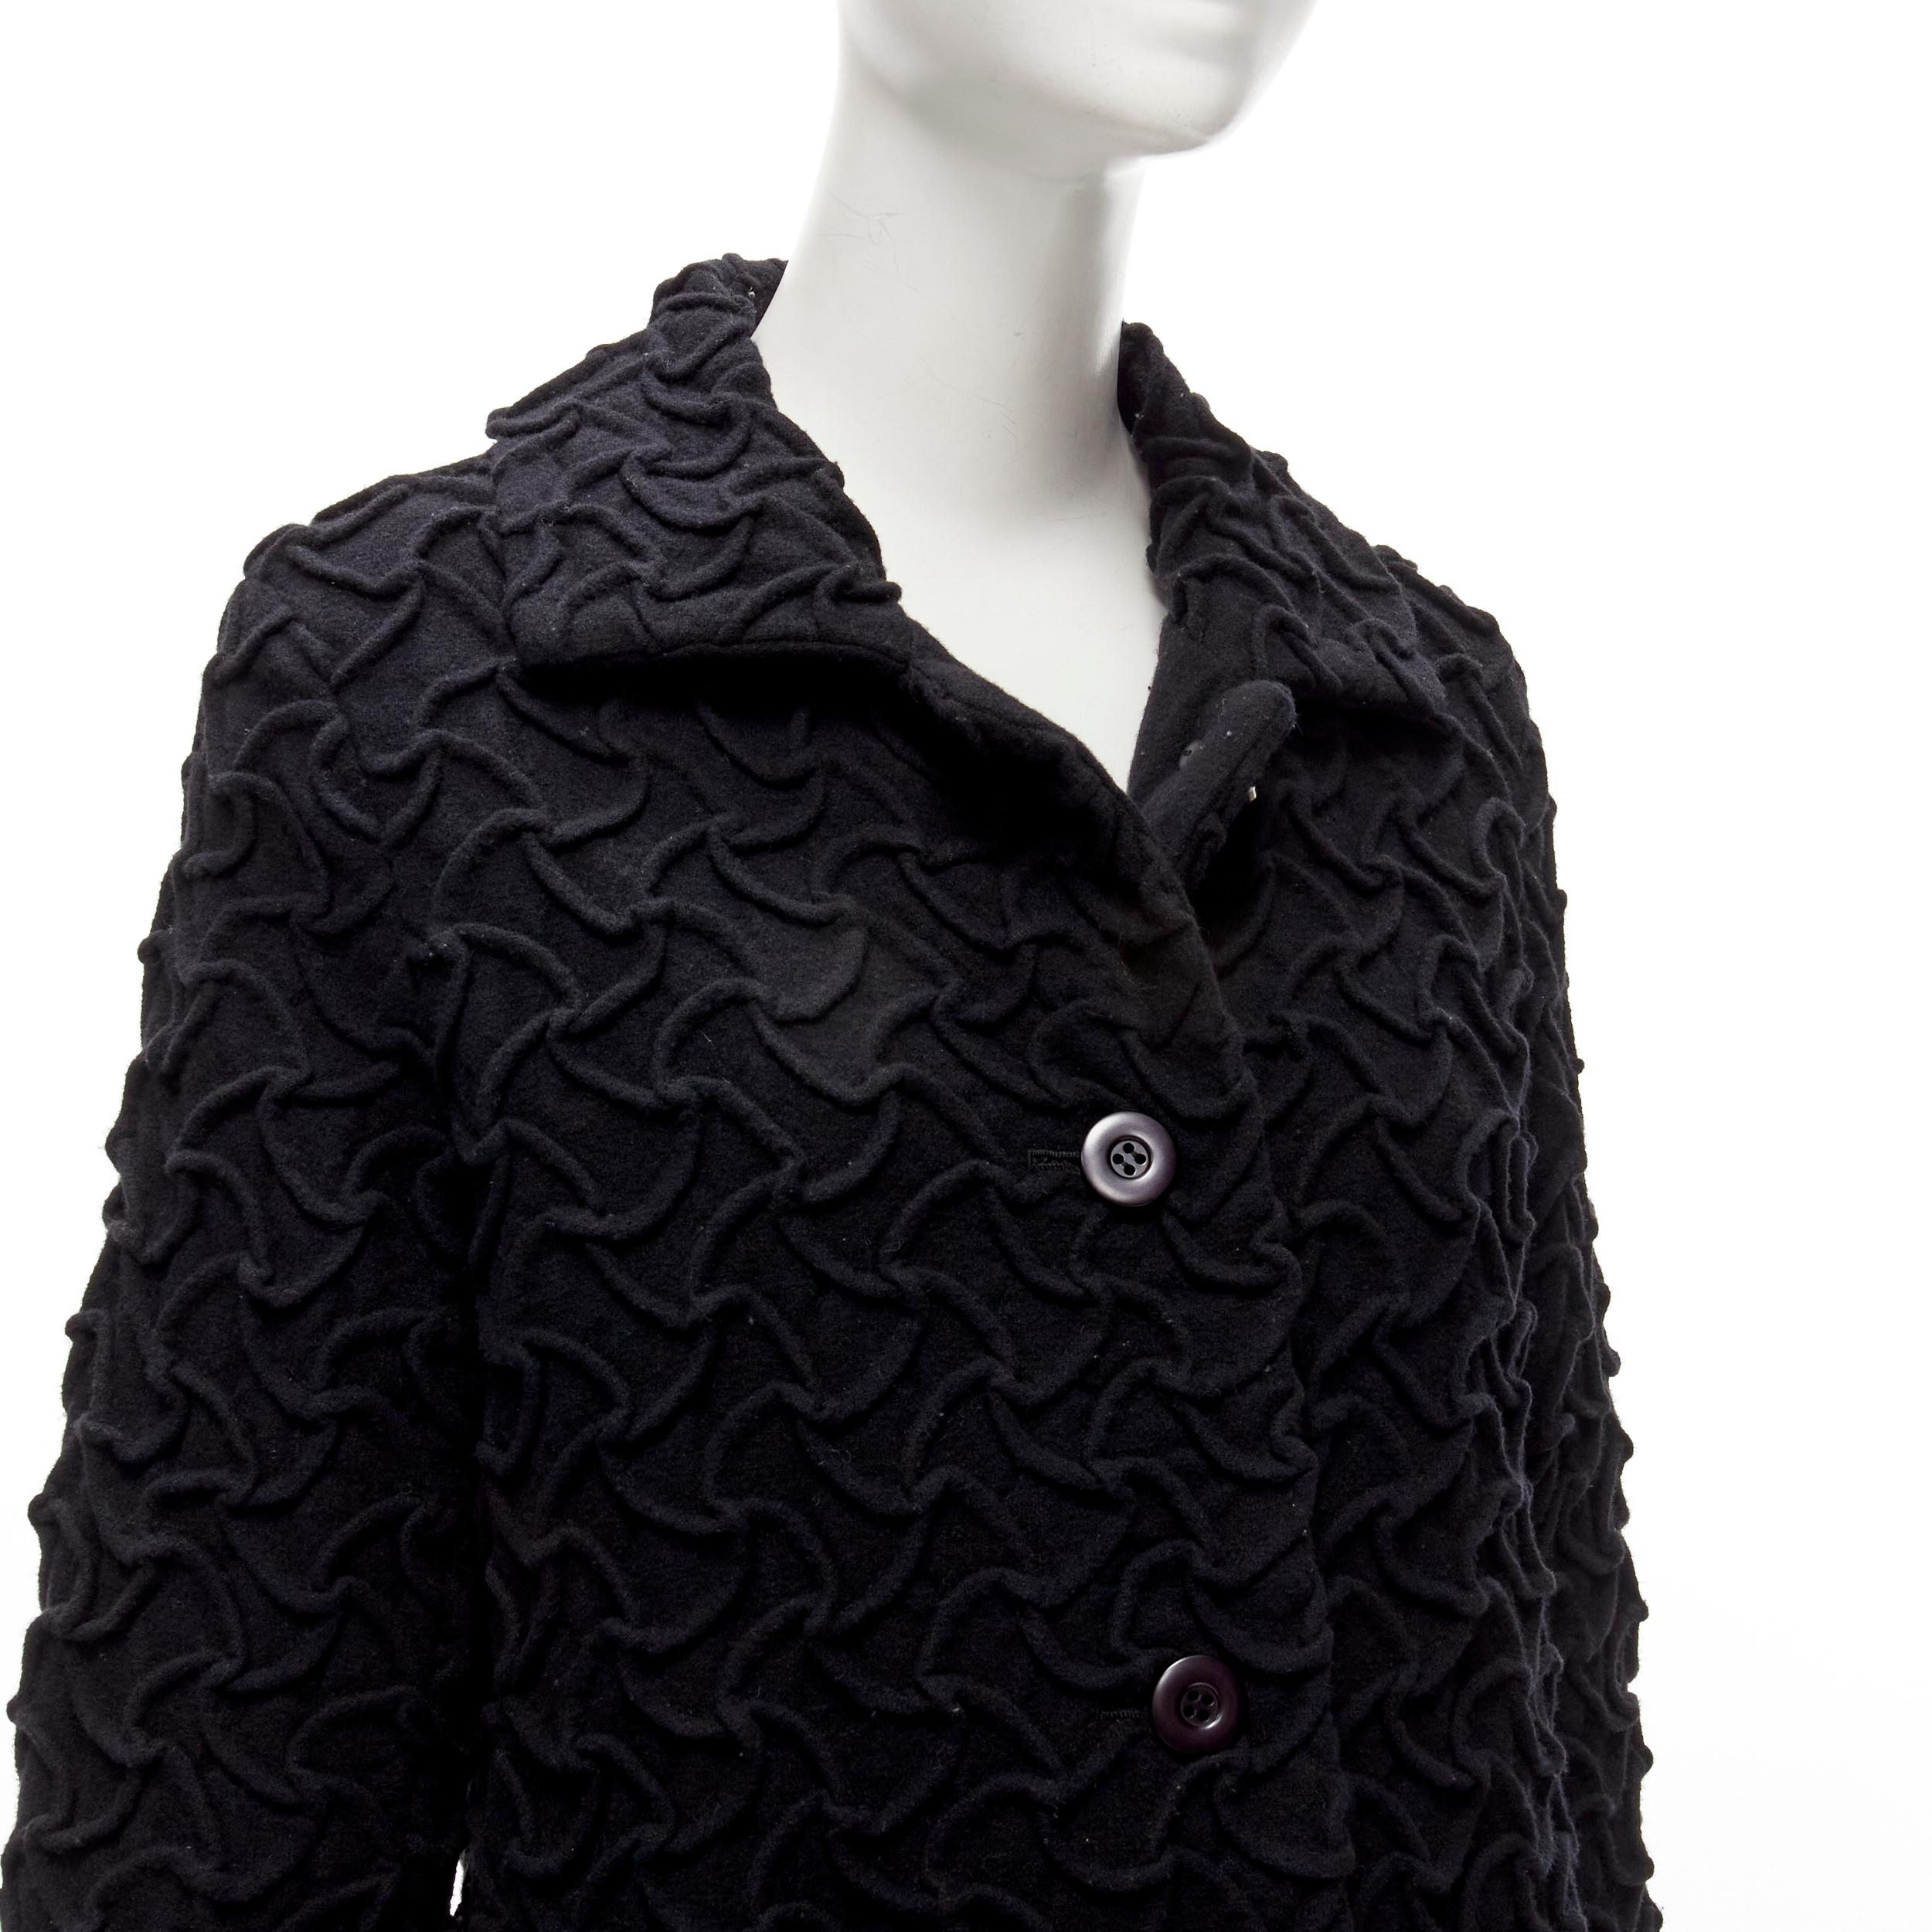 ISSEY MIYAKE 100% wool black textured single breasted long jacket coat JP2 M
Reference: TGAS/C01739
Brand: Issey Miyake
Material: Wool
Color: Black
Pattern: Solid
Closure: Button
Lining: Black Polyester
Made in: Japan

CONDITION:
Condition: